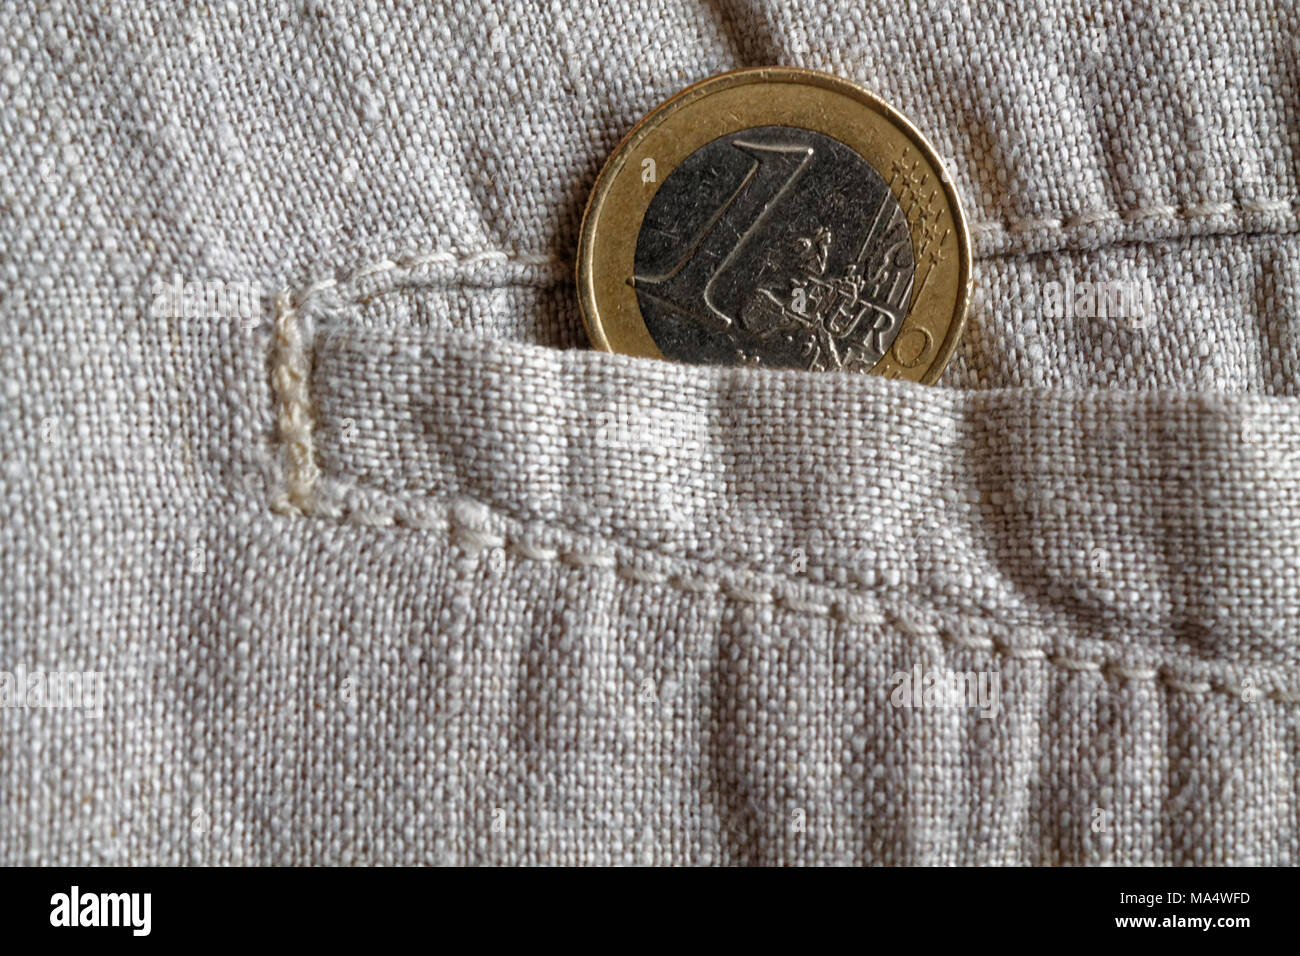 Euro coin with a denomination of 1 euro in the pocket of worn linen pants Stock Photo